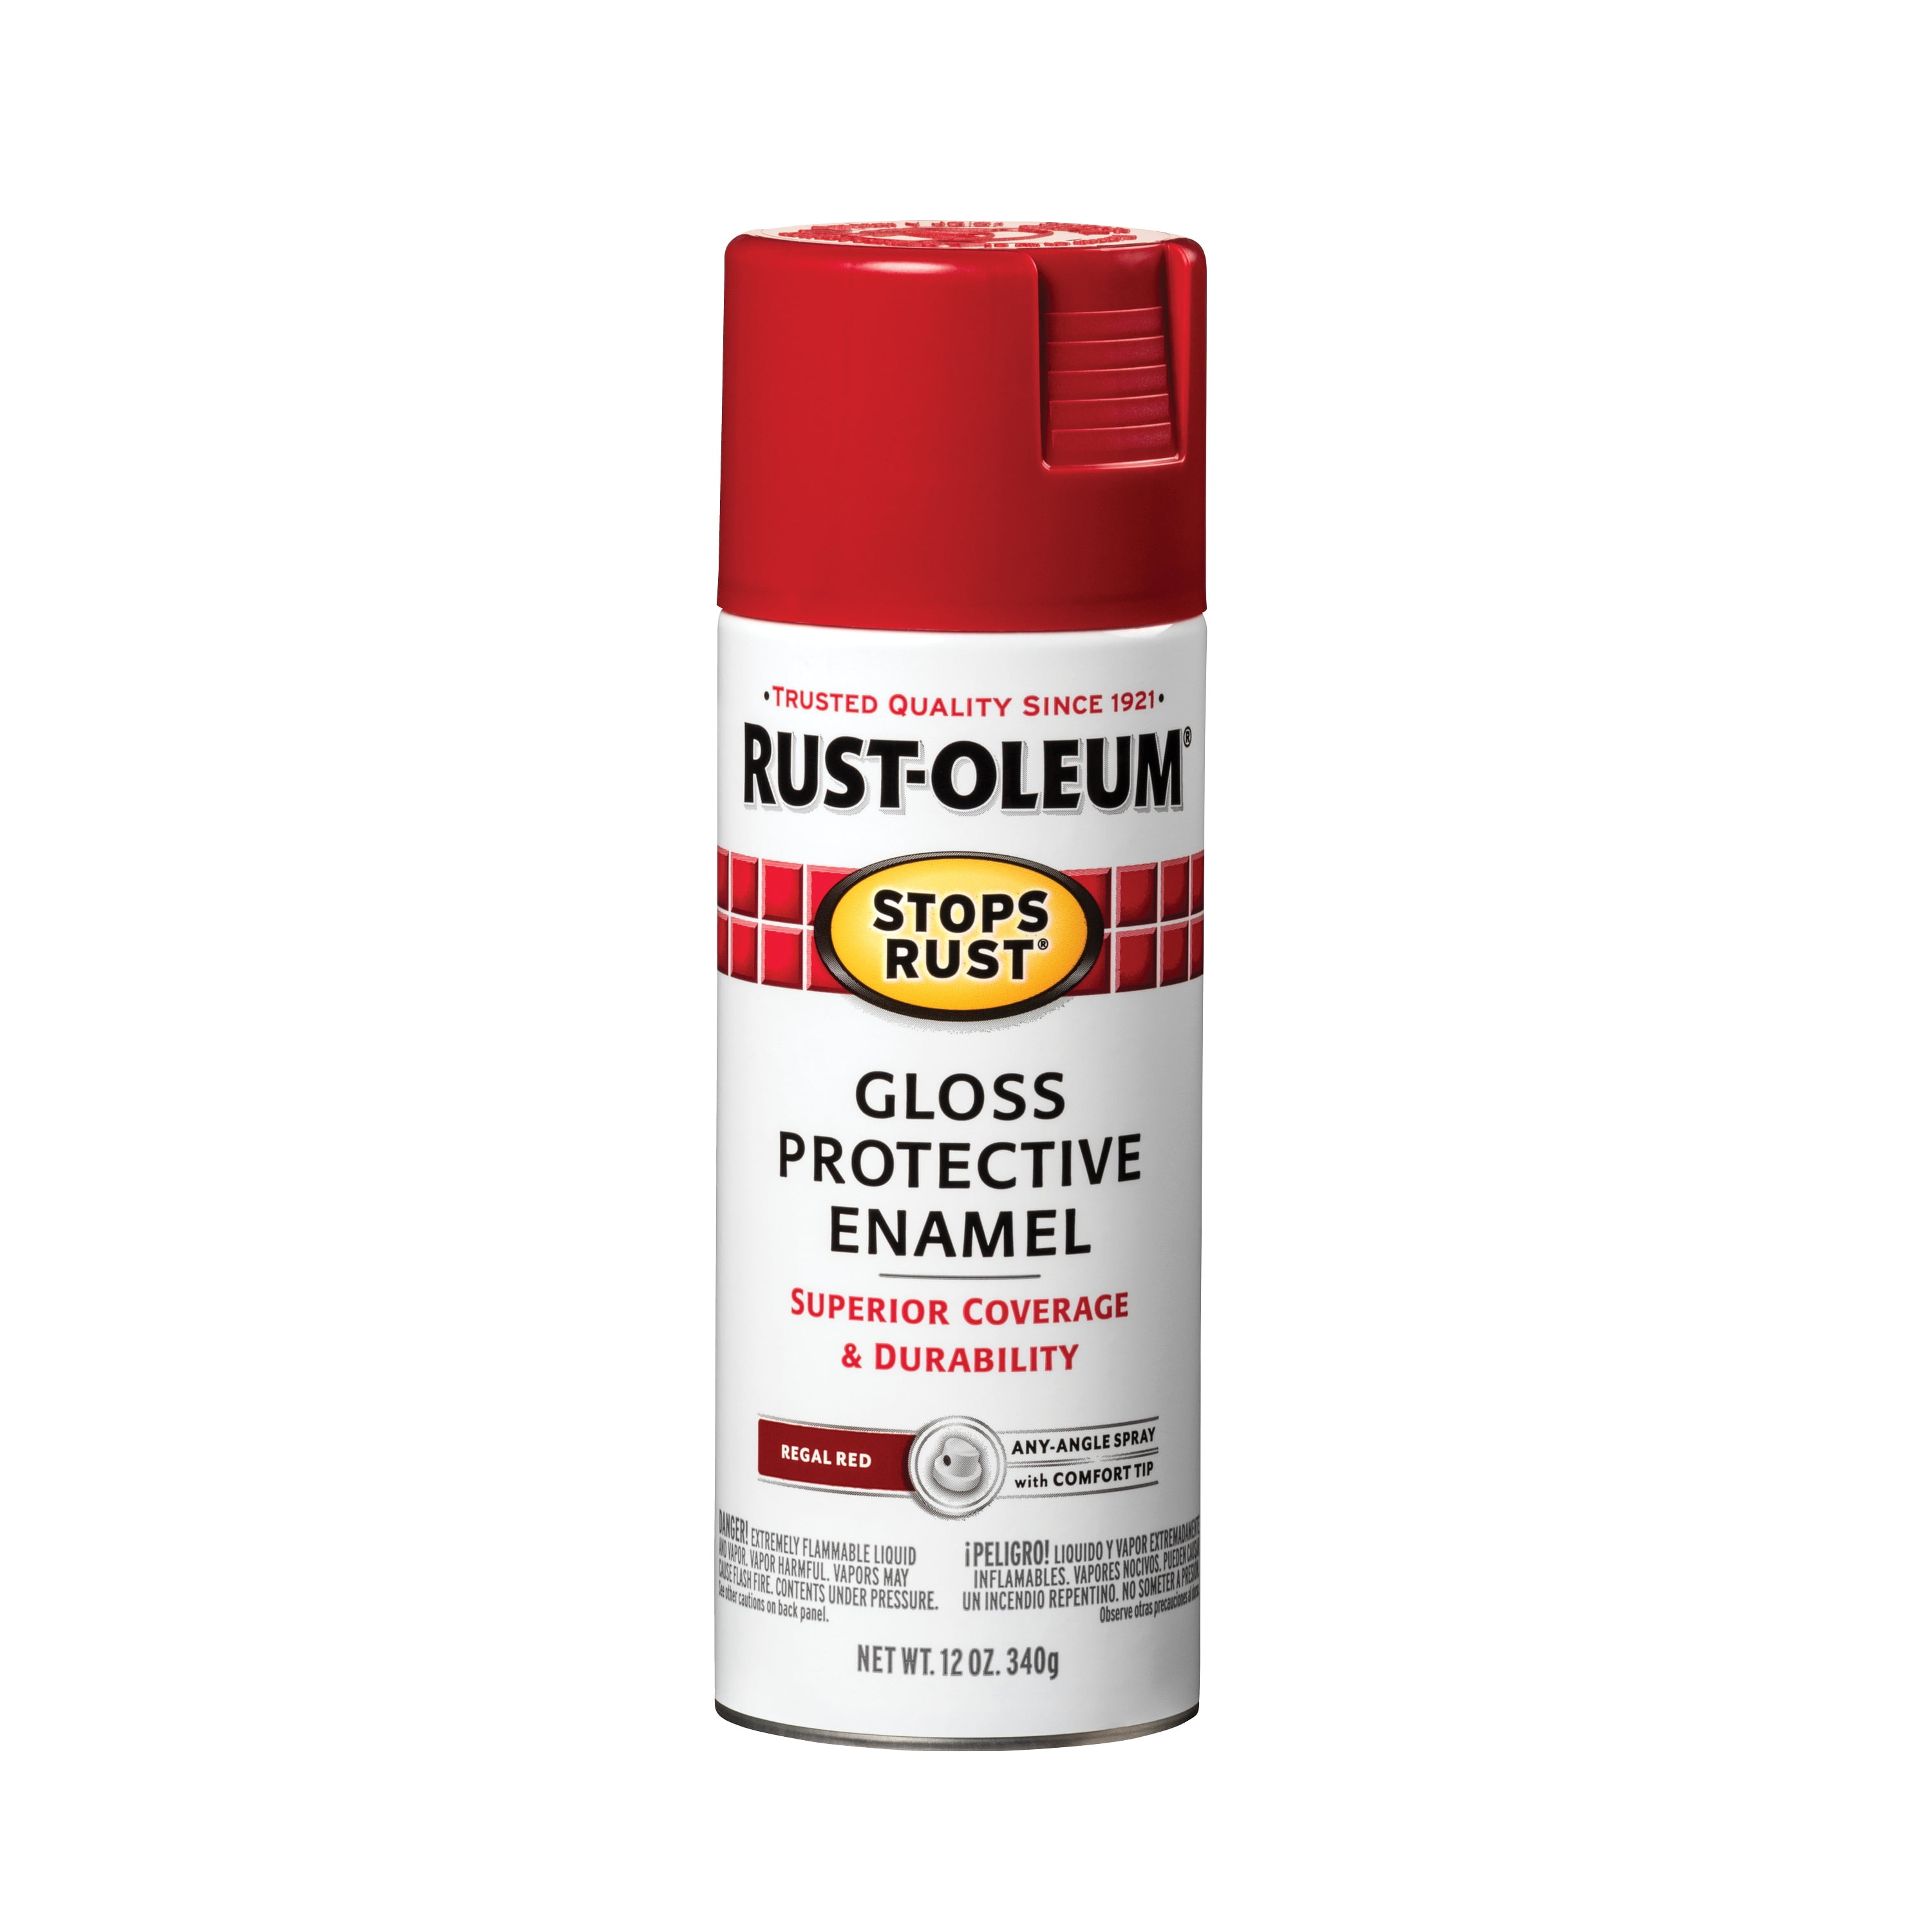 Ace Rust Stop Gloss Regal Red Protective Enamel Spray Paint 15 oz